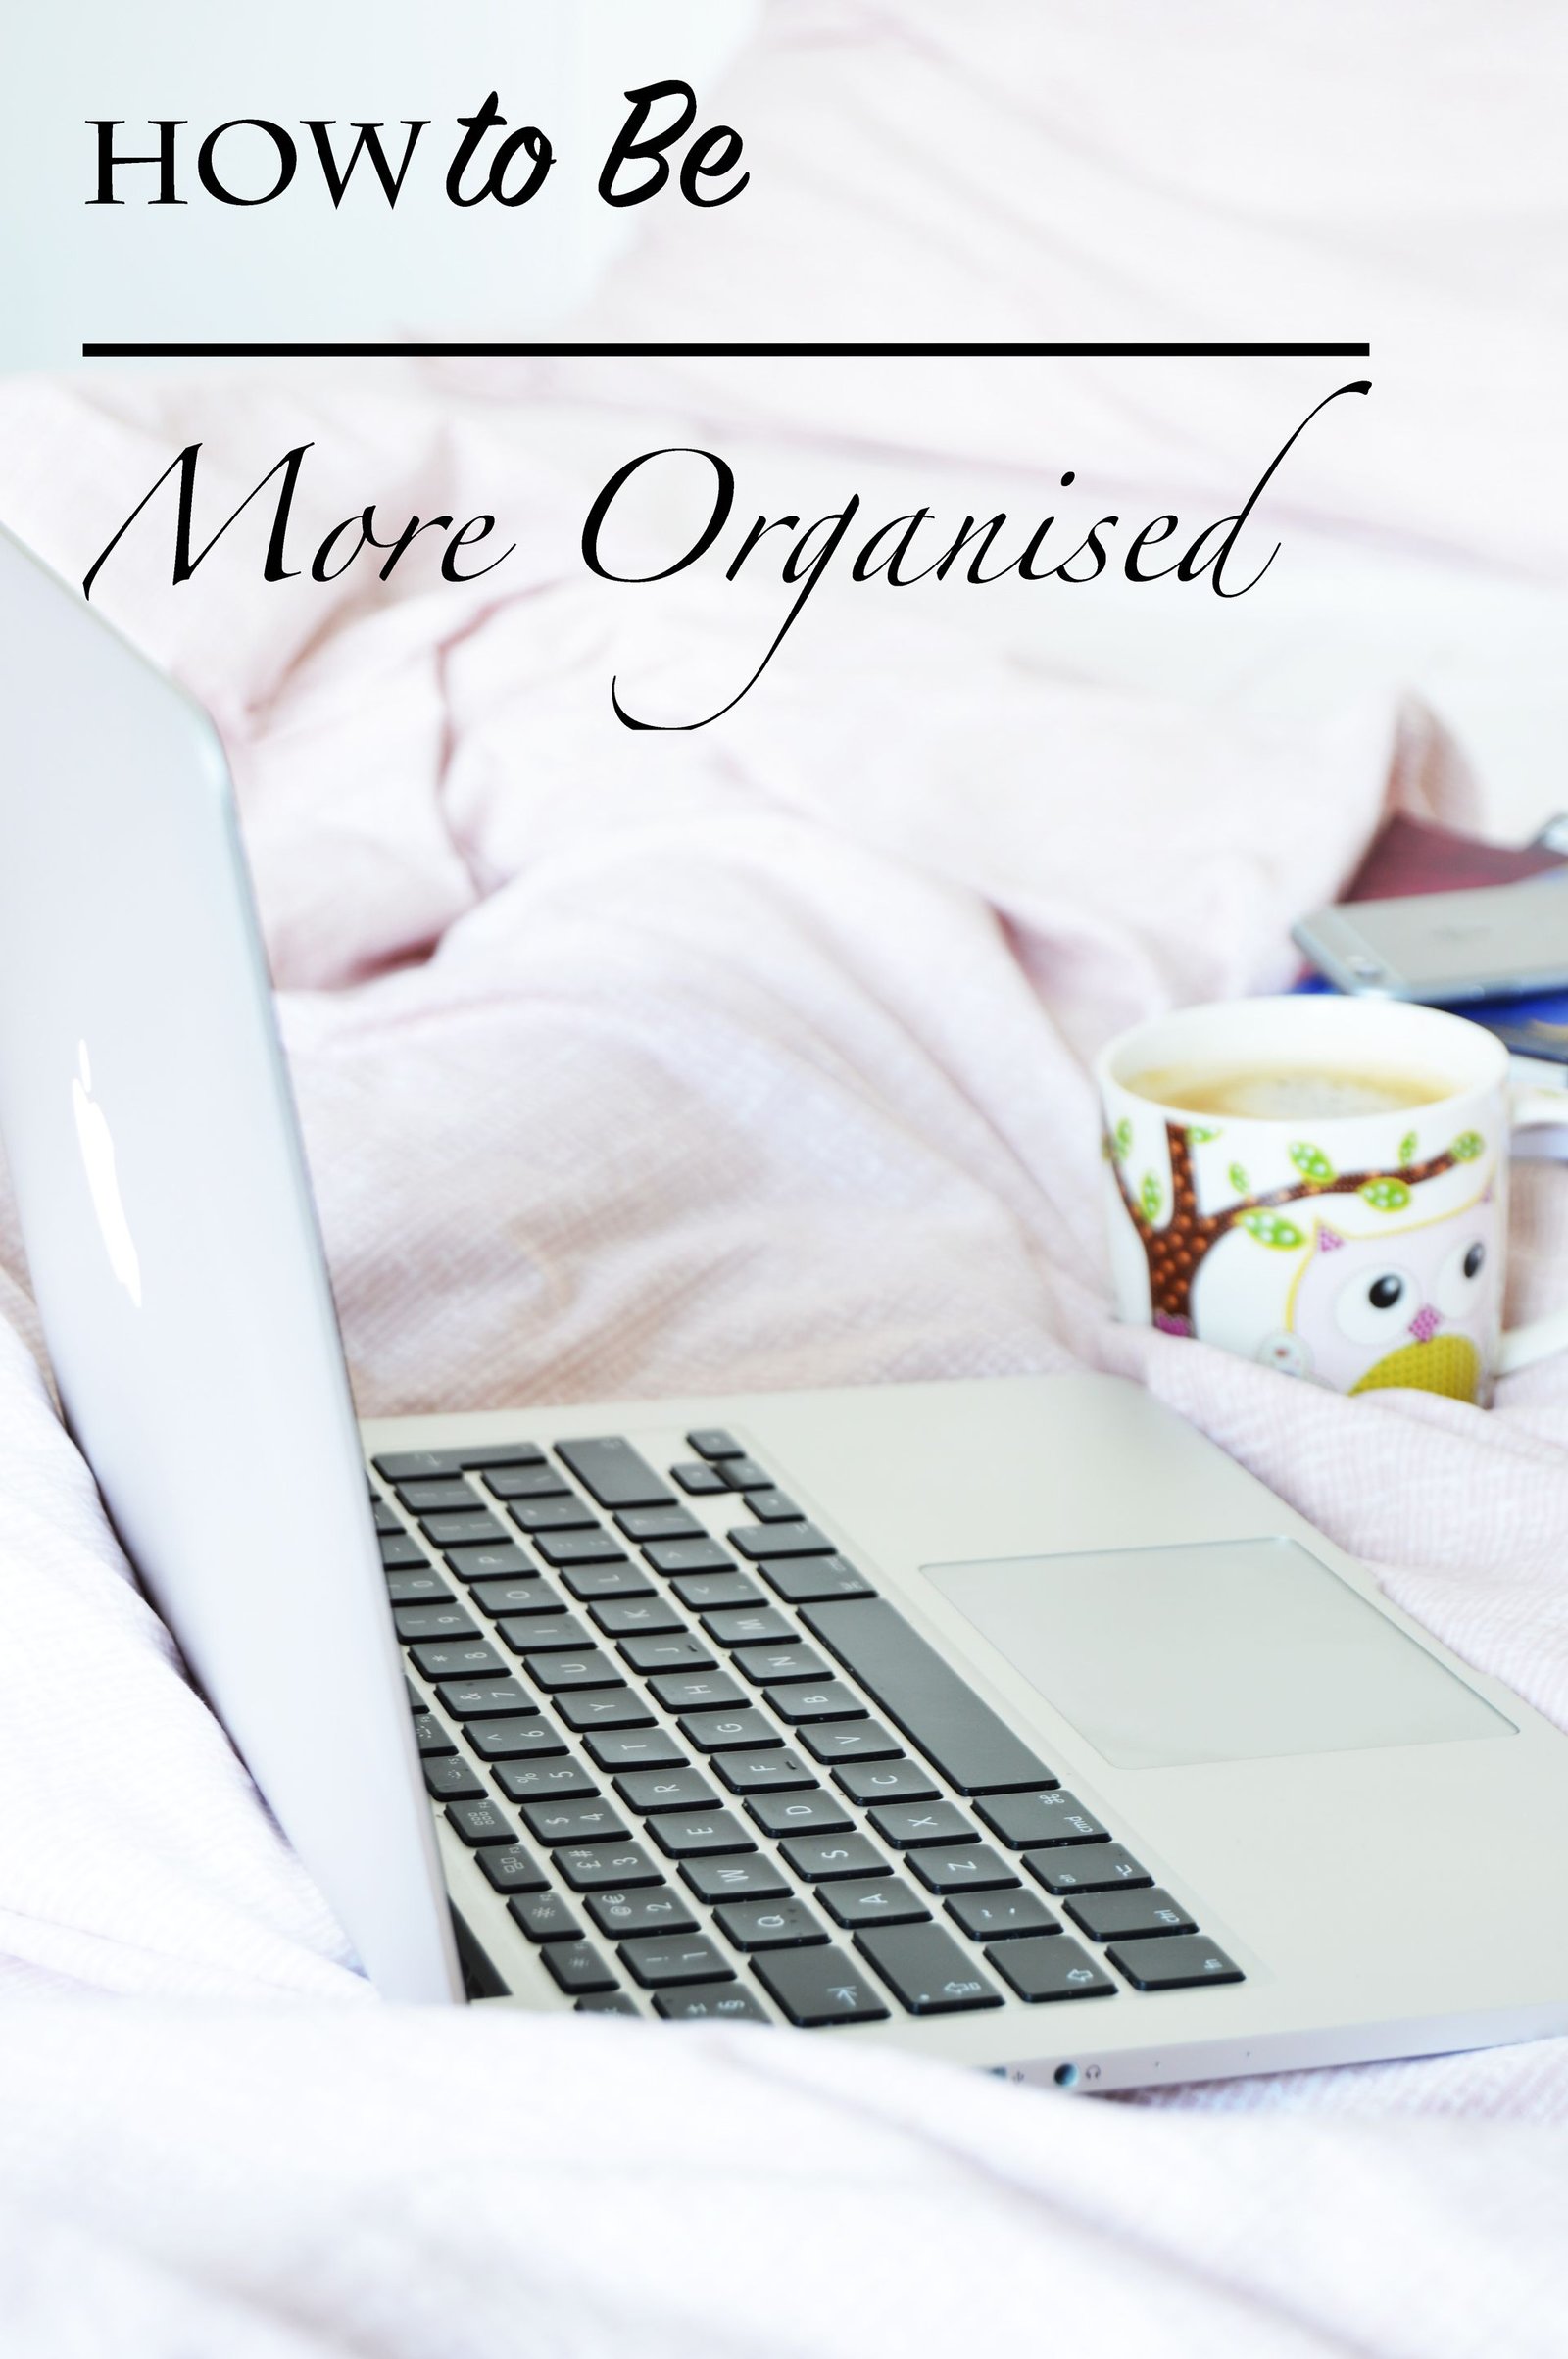 Being organised might not seem easy however with a few changes, life can get so easy. Being more organised is in your hands, how to to be more organised to get rid of the daily stress?